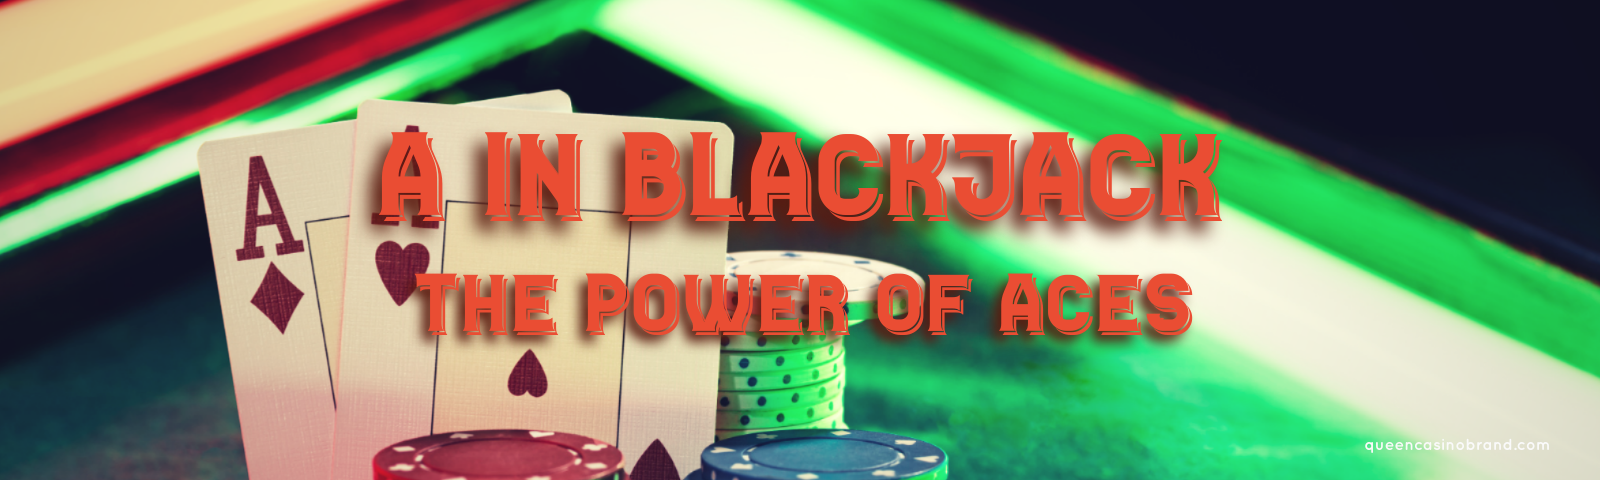 A in Blackjack The Power of Aces - Queen Casino Brand